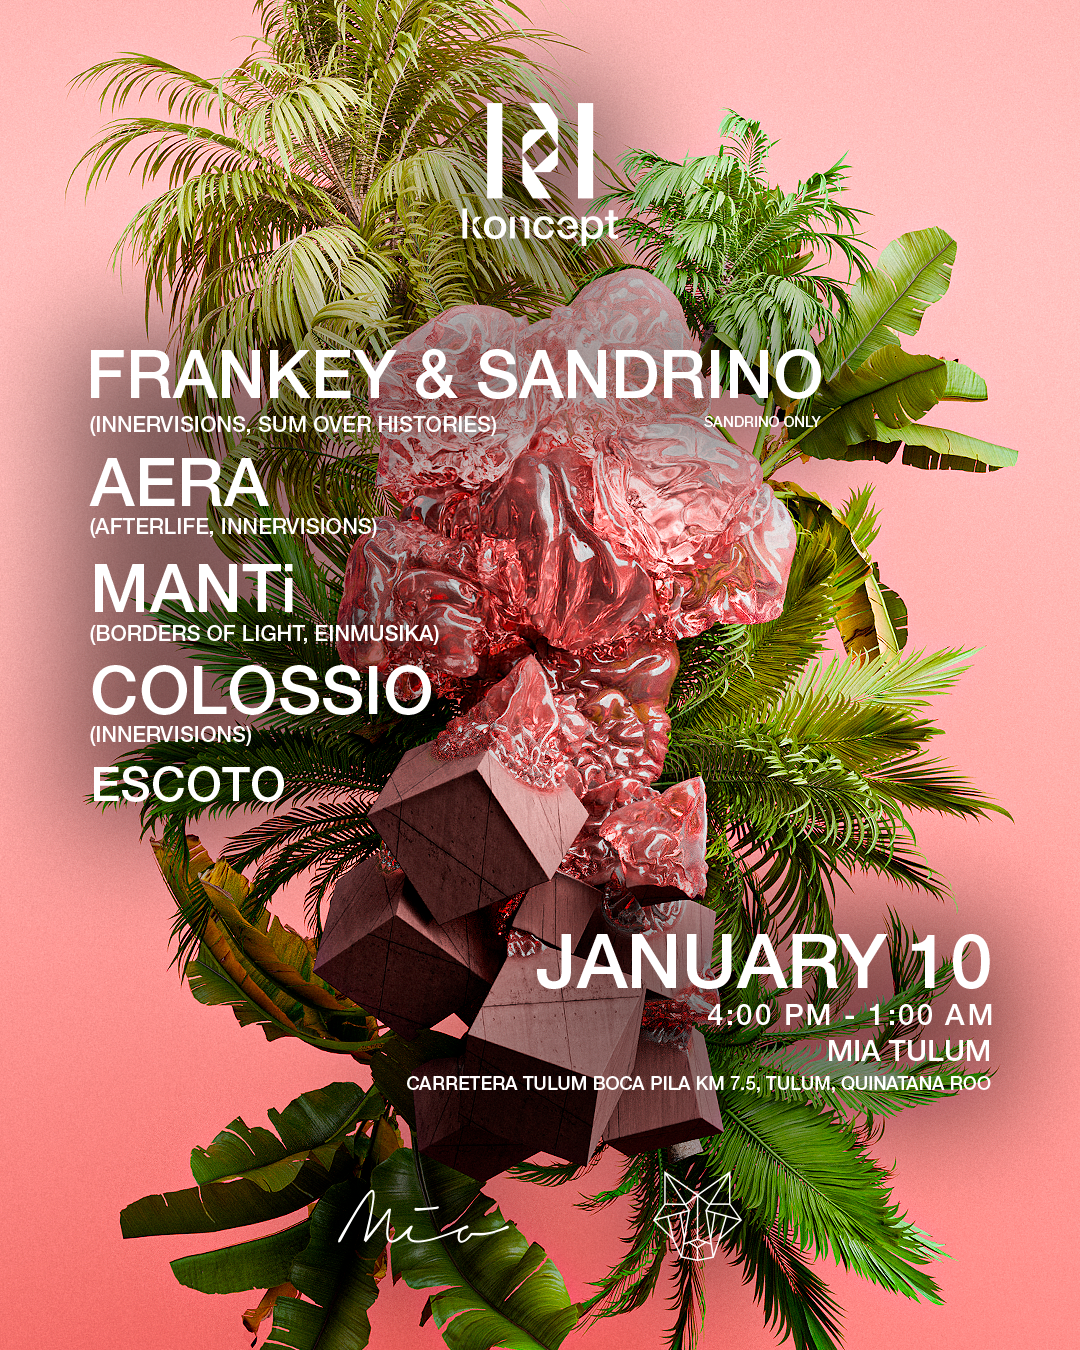 Koncept presents: Frankey & Sandrino (Innervisions), Aera (Afterlife, Innervisions) - フライヤー表